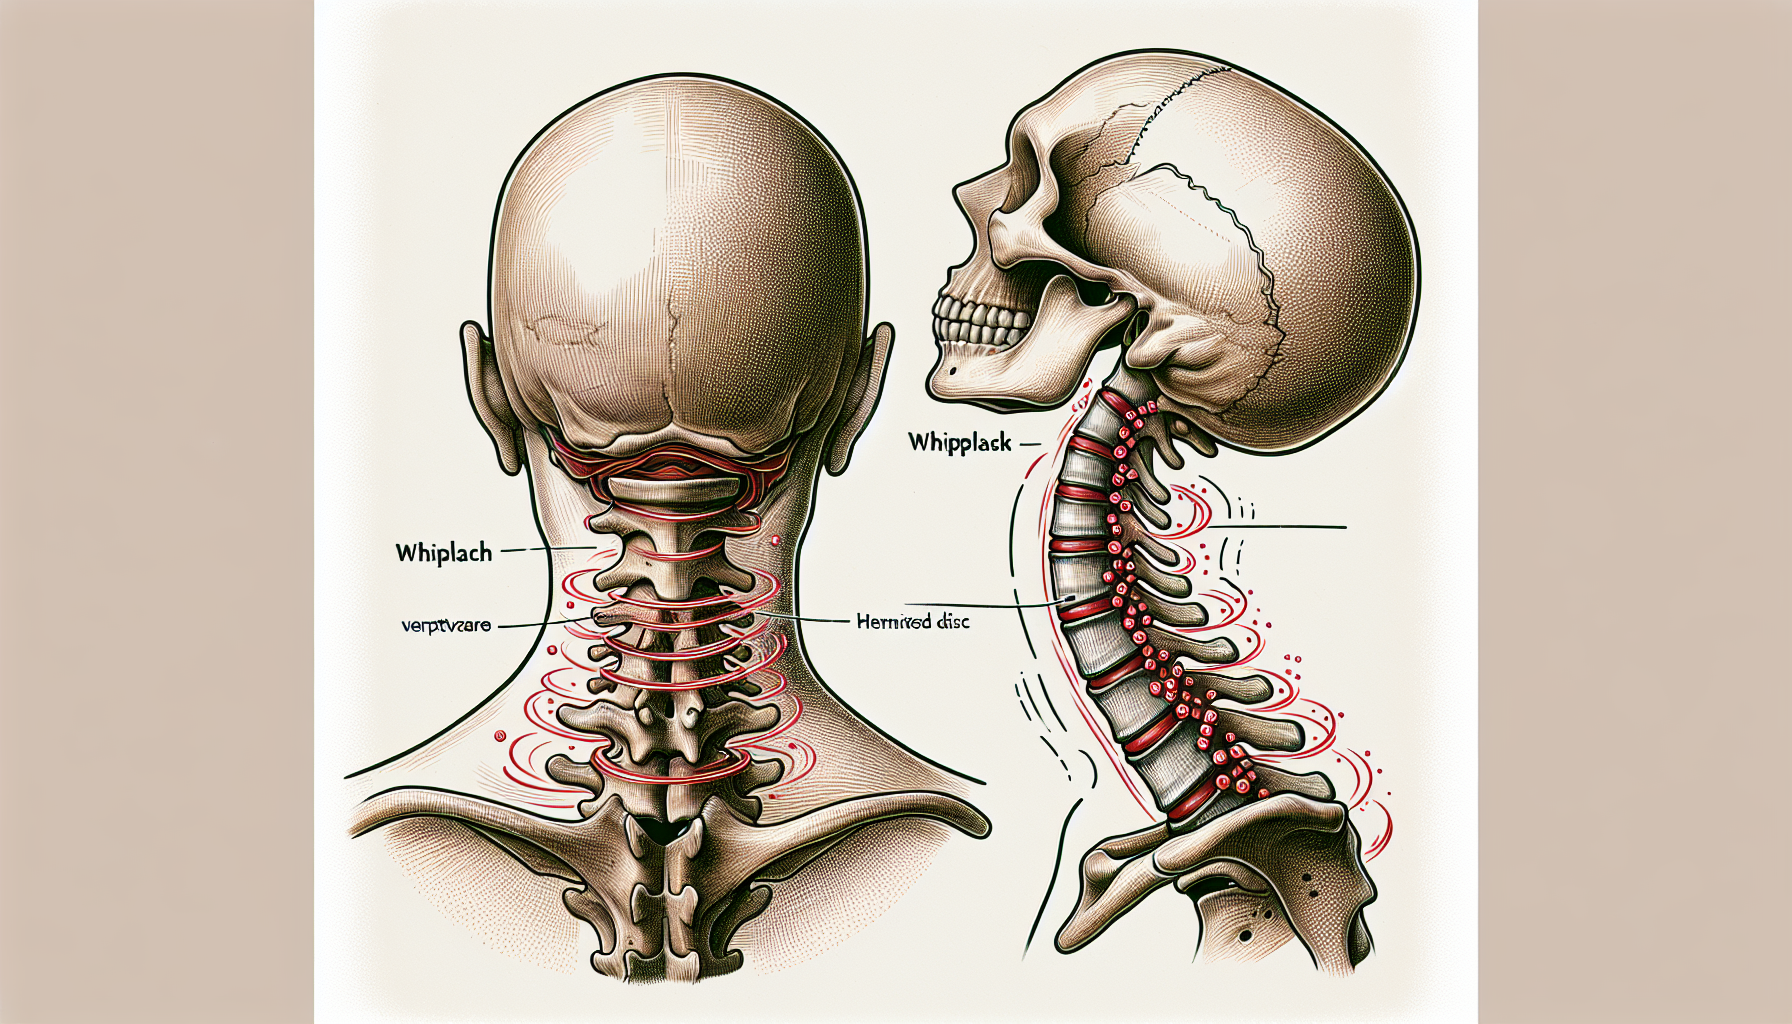 Illustration of different types of neck injuries